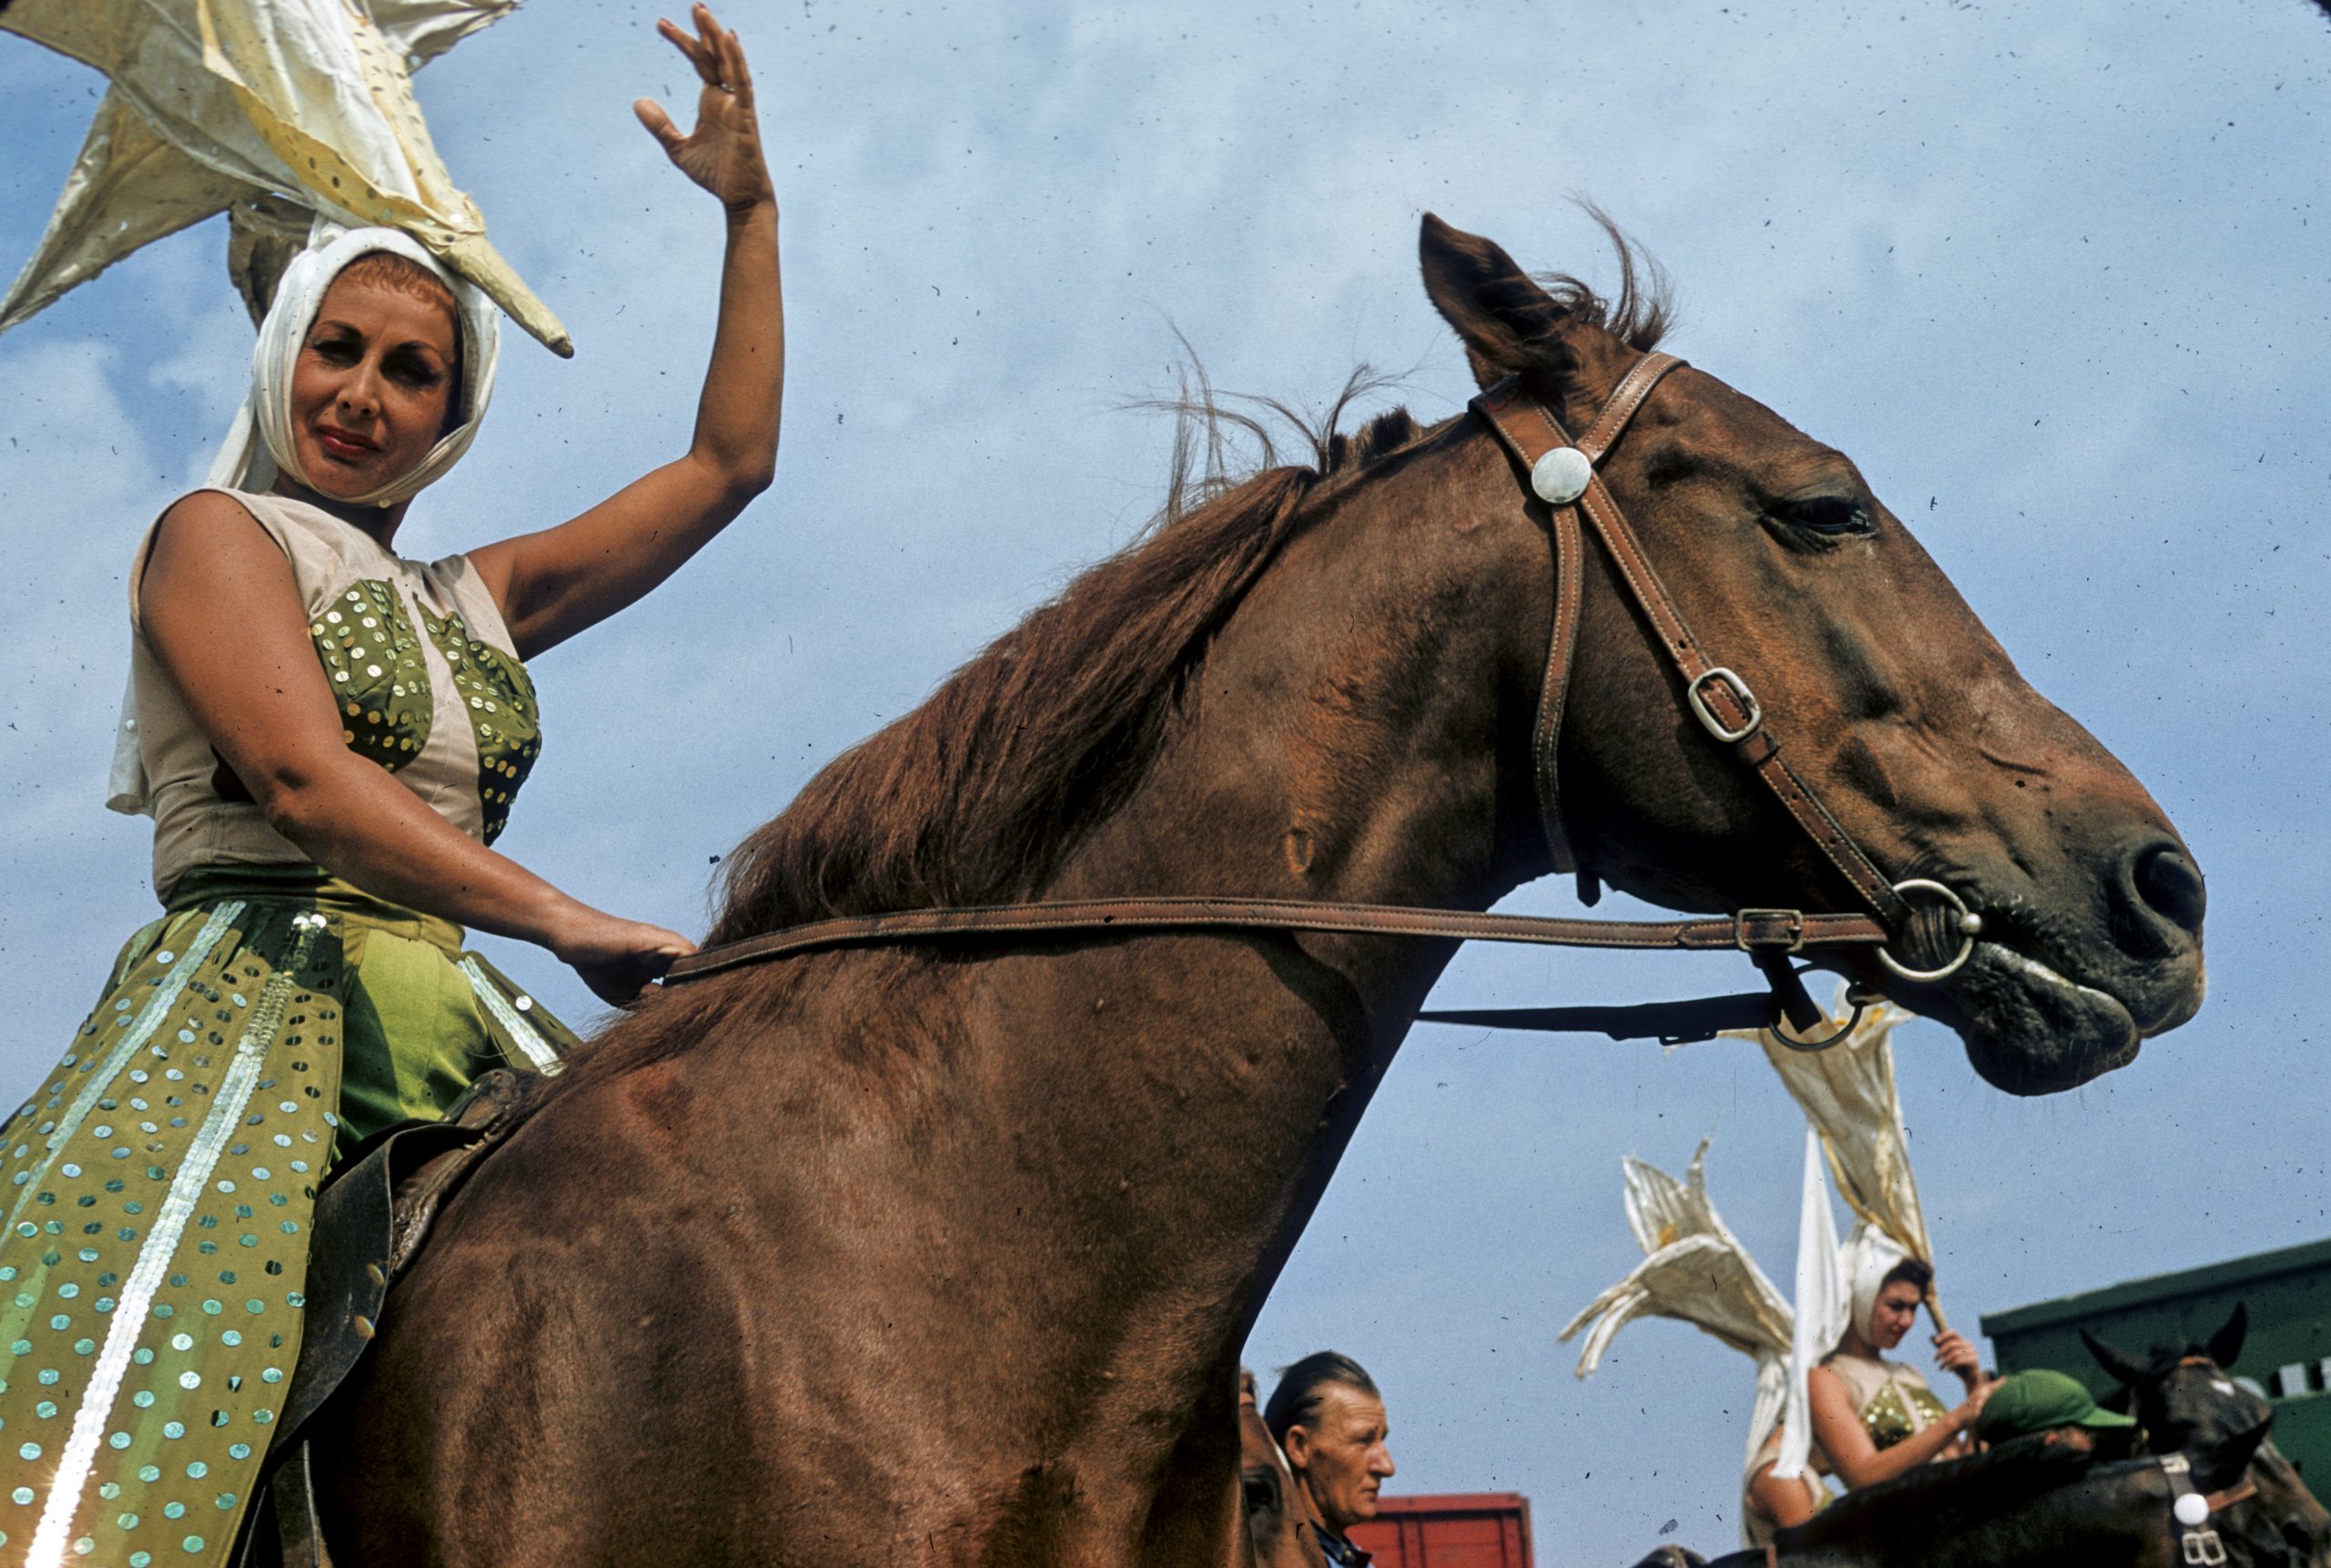 Image of a woman wearing a large star headdress and green and white outfit, extending her arm and sitting on top of a horse.